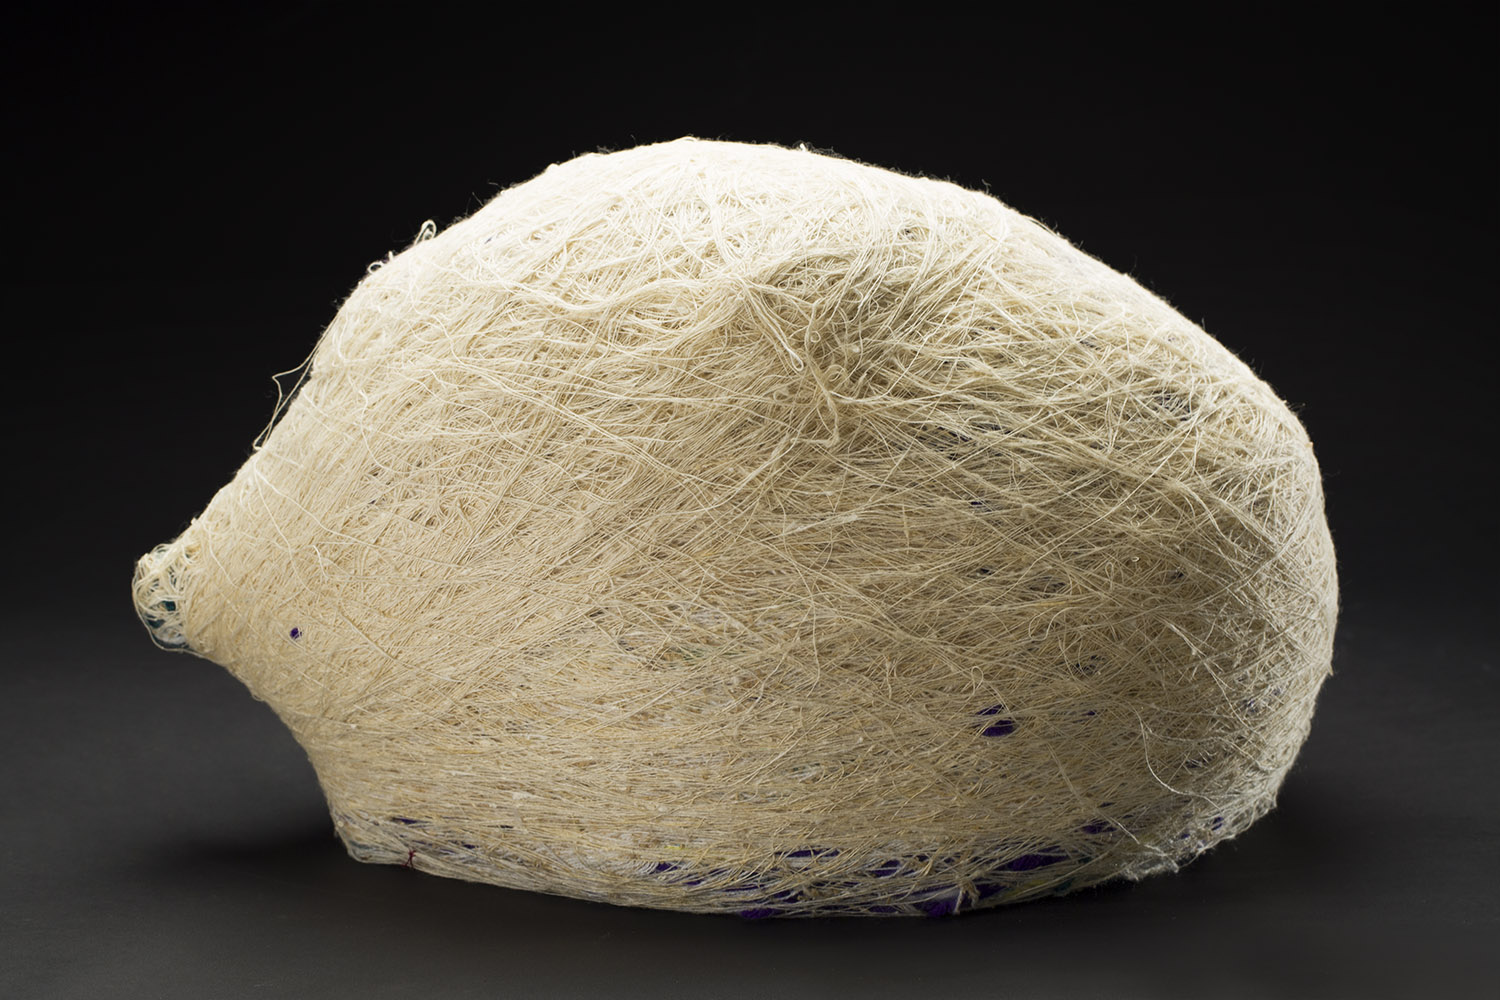  Tony Pedemonte Untitled, 2014 Fiber and wood 20 x 16 x 12 inches 50.8 x 40.6 x 30.5 cm TPed 12 